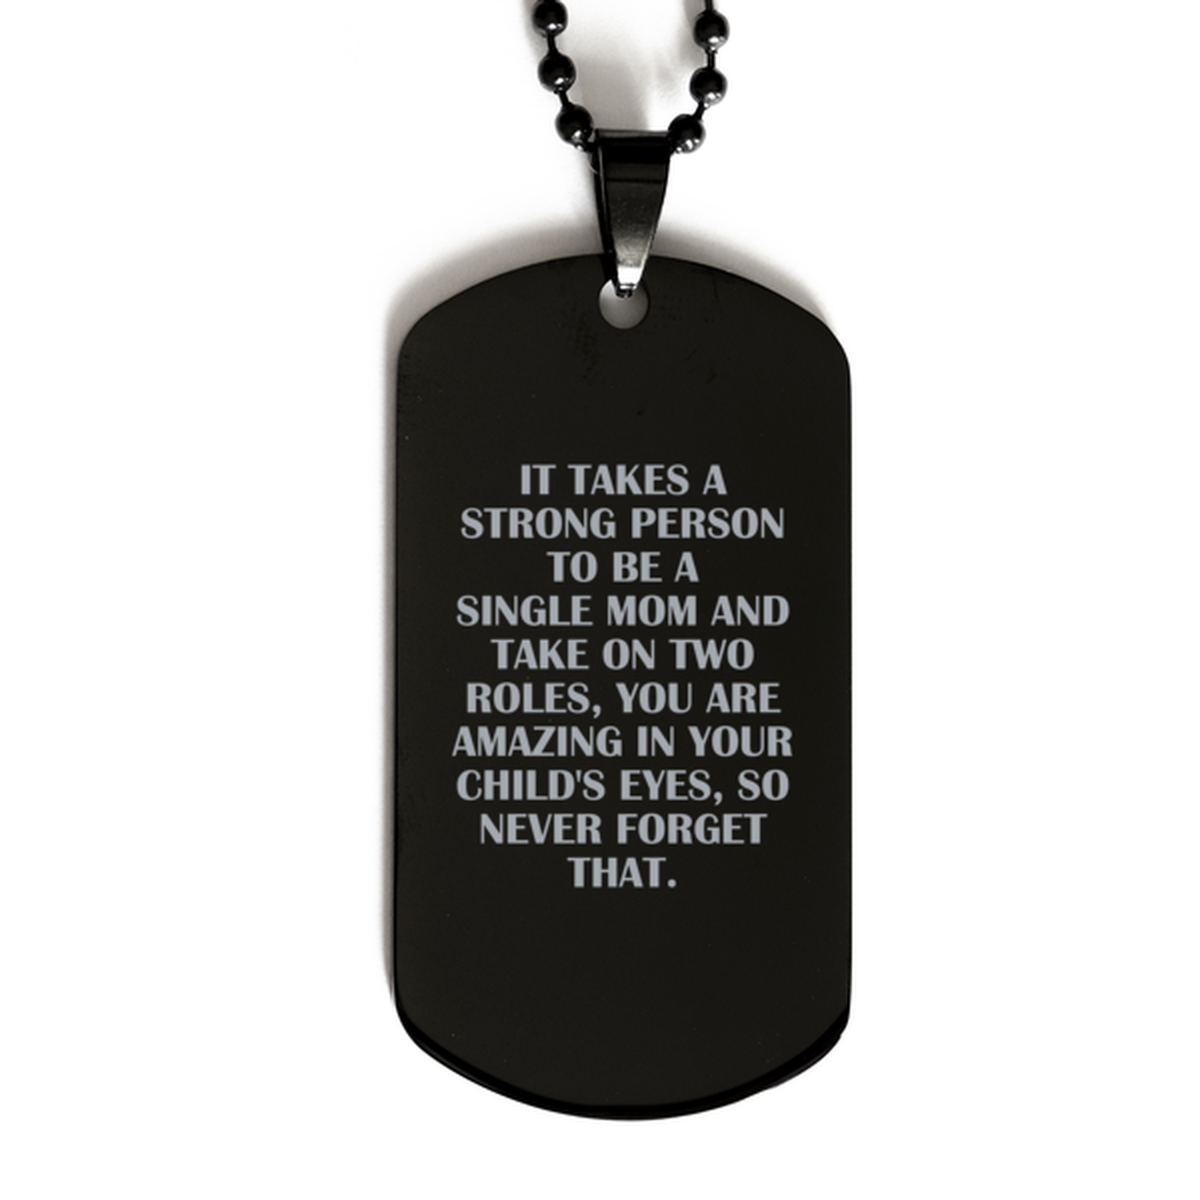 To My Single Mom Black Dog Tag, A Strong Person, Mothers Day Gifts For Single Mom From Friends, Birthday Gifts For Women